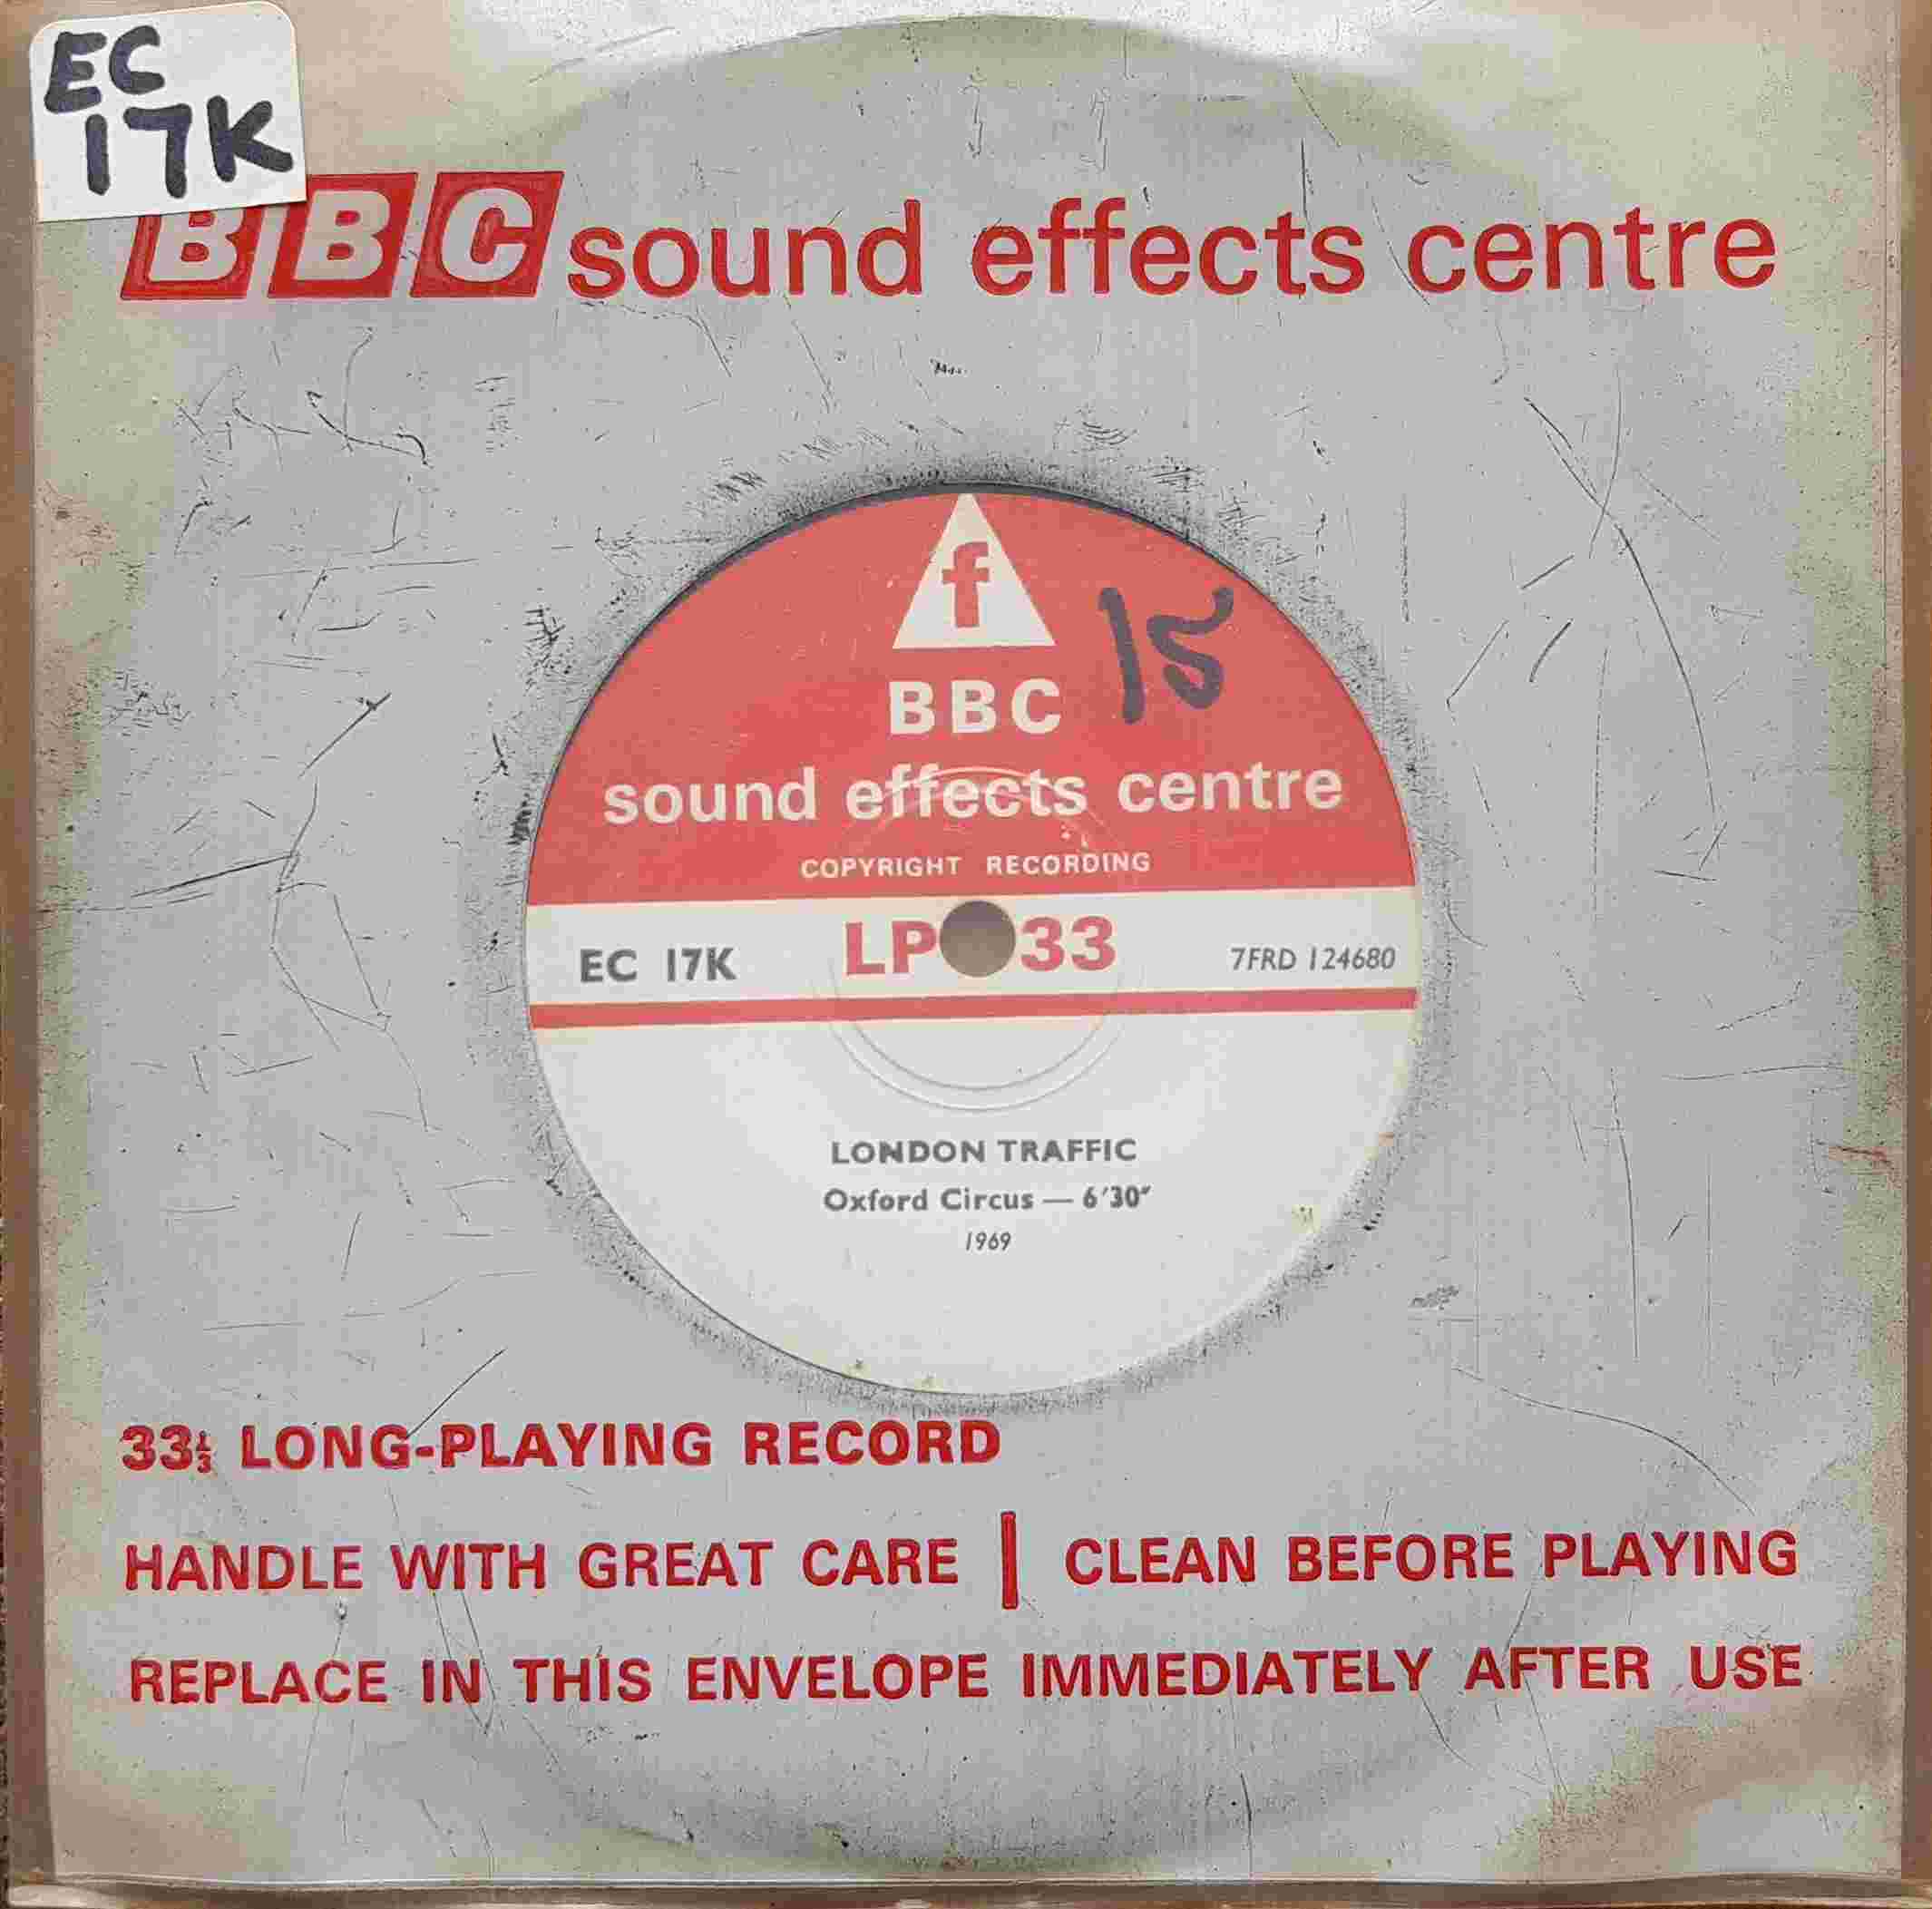 Picture of EC 17K London traffic by artist Not registered from the BBC singles - Records and Tapes library